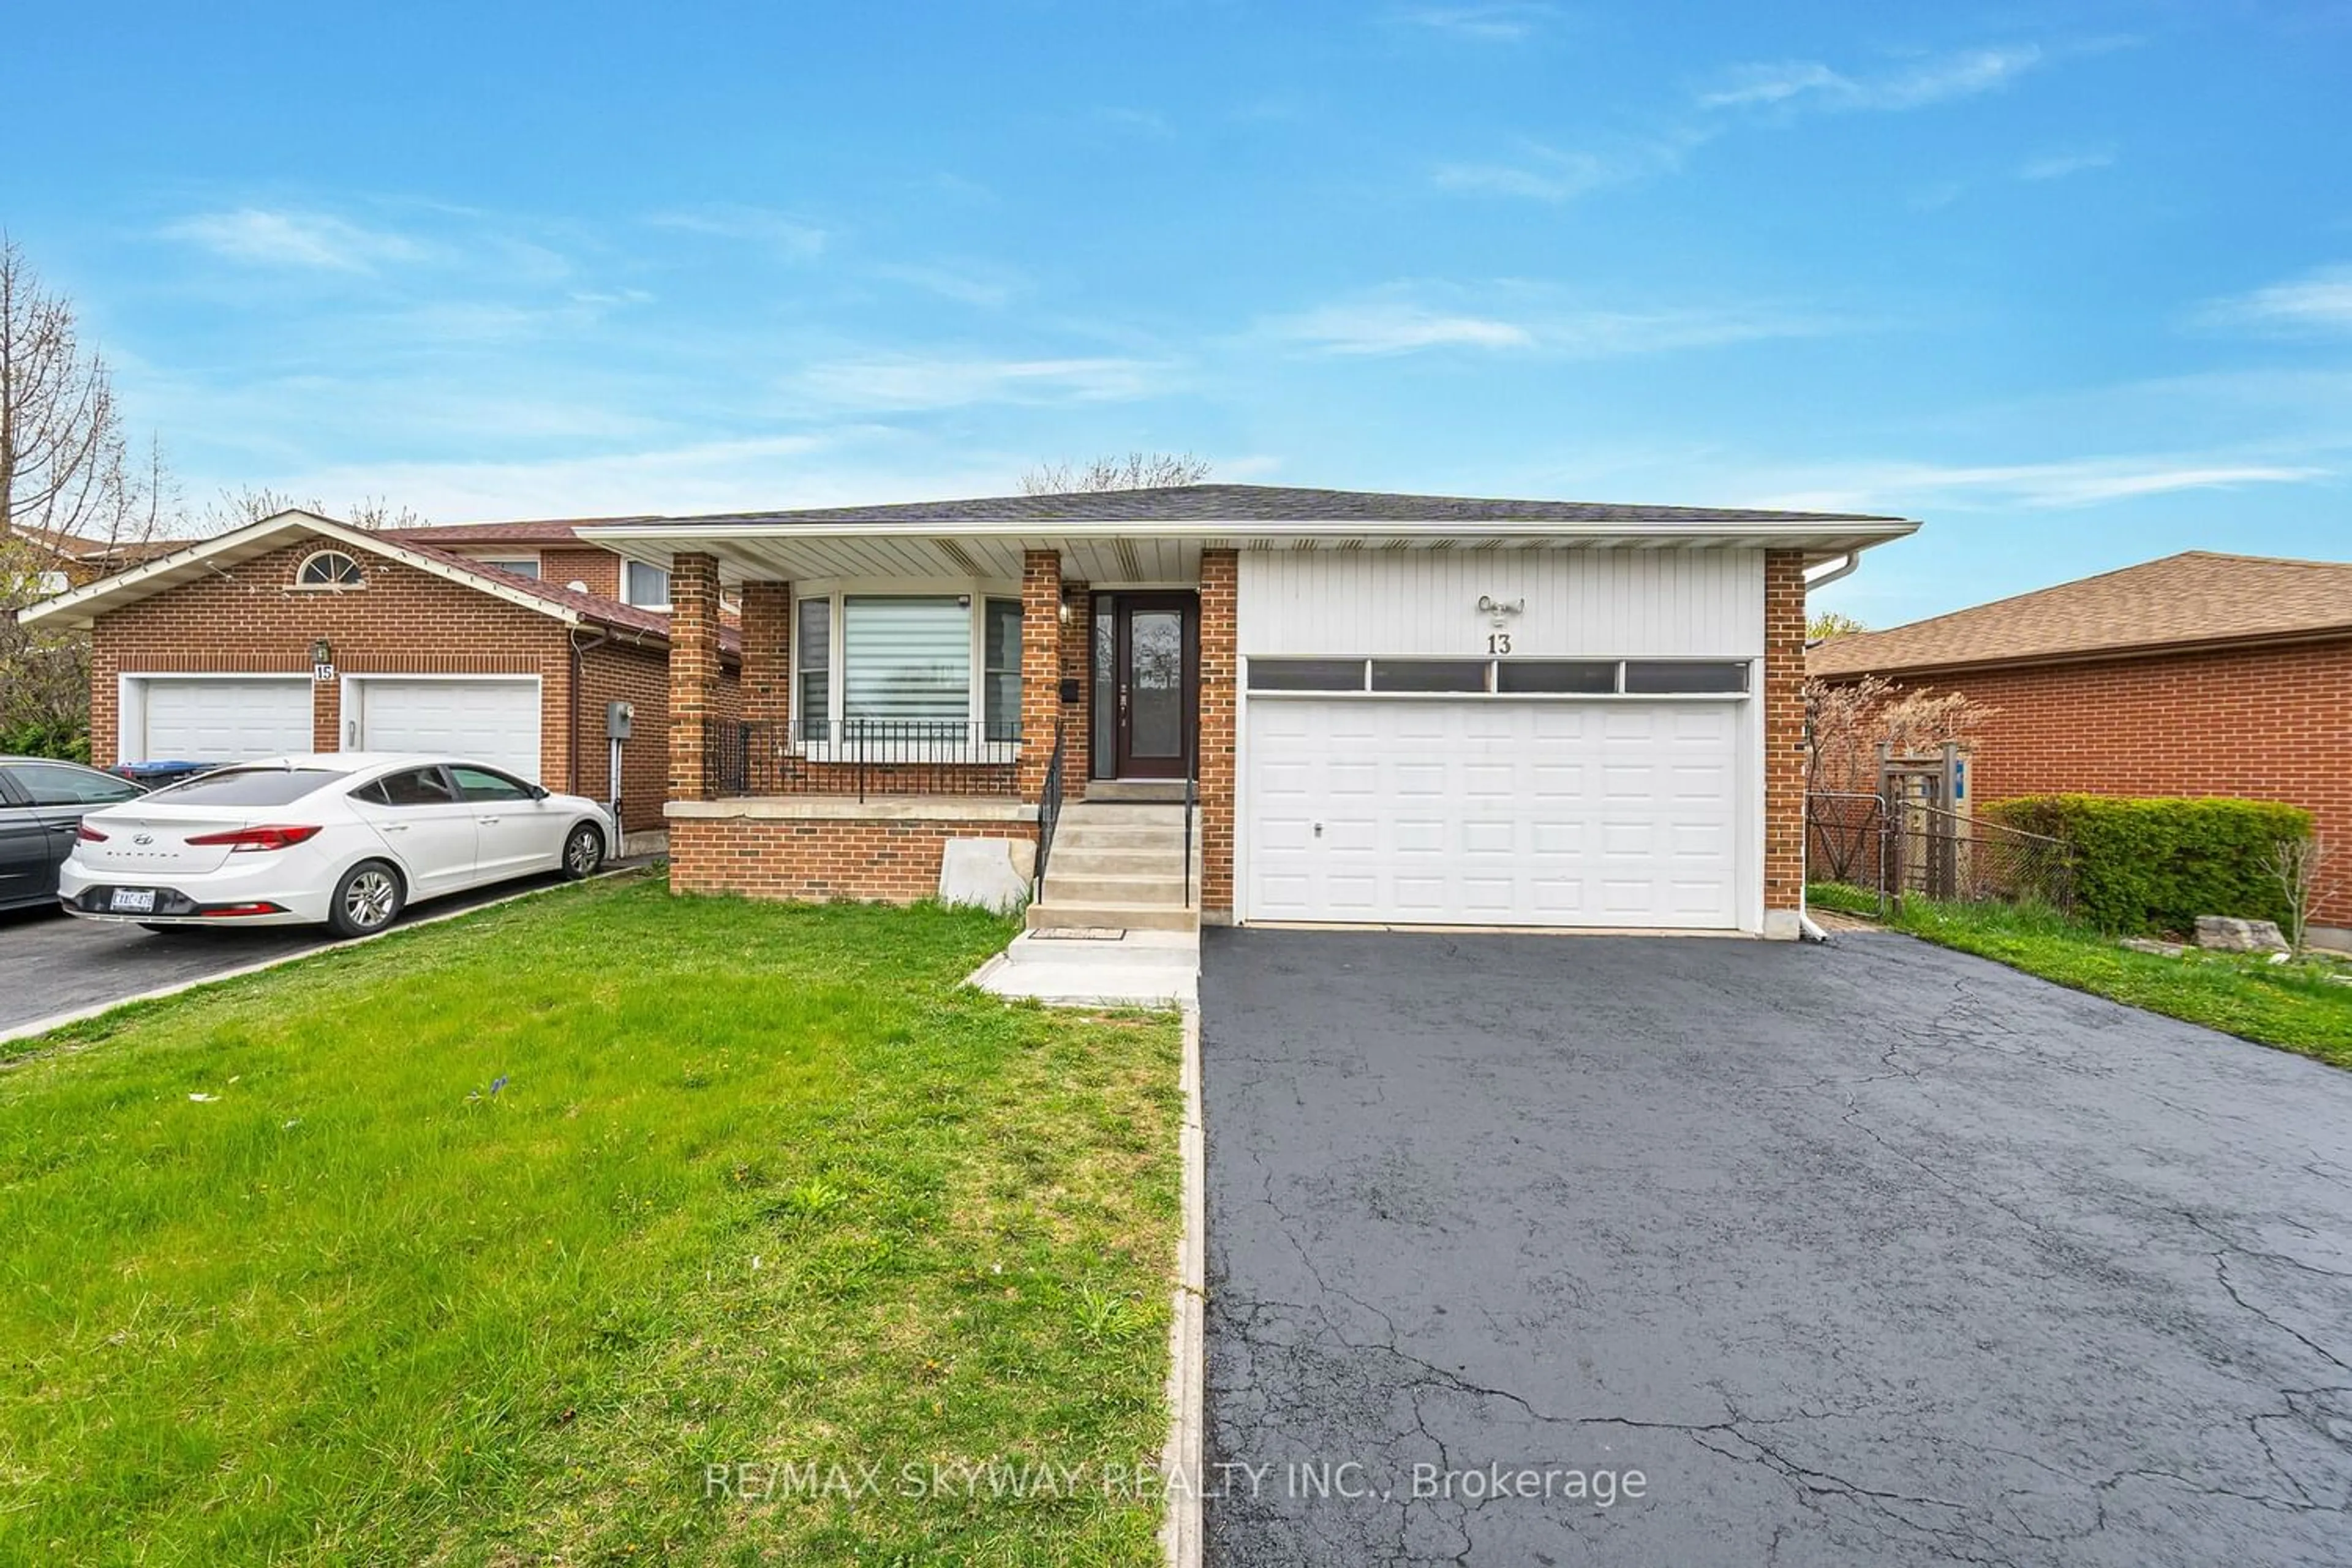 Frontside or backside of a home for 13 Panorama Cres, Brampton Ontario L6S 3T7